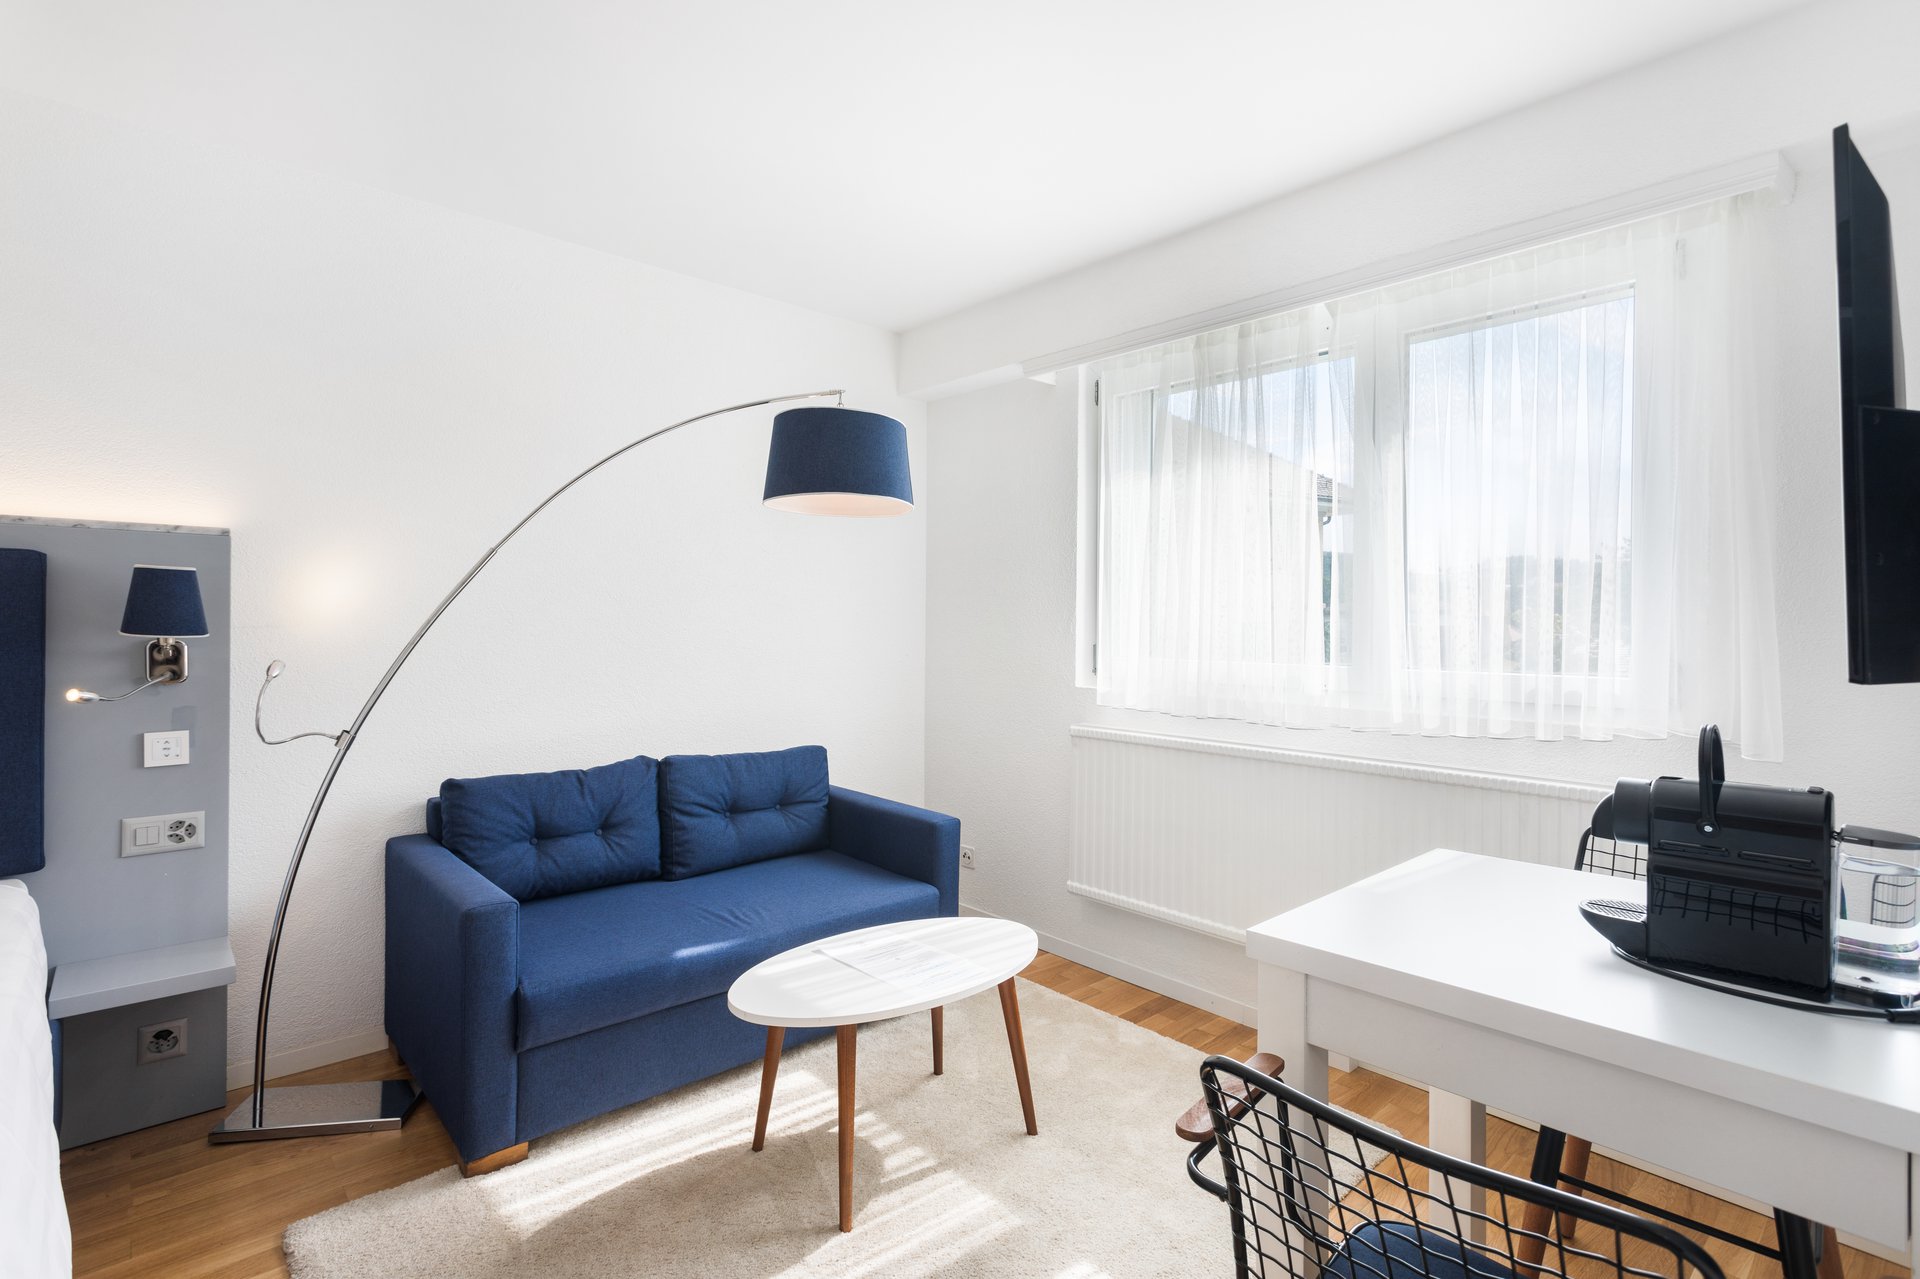 One of the brand new furnished studios located on the heights of Lausanne, in the very convienient La Sallaz, close to the Pa